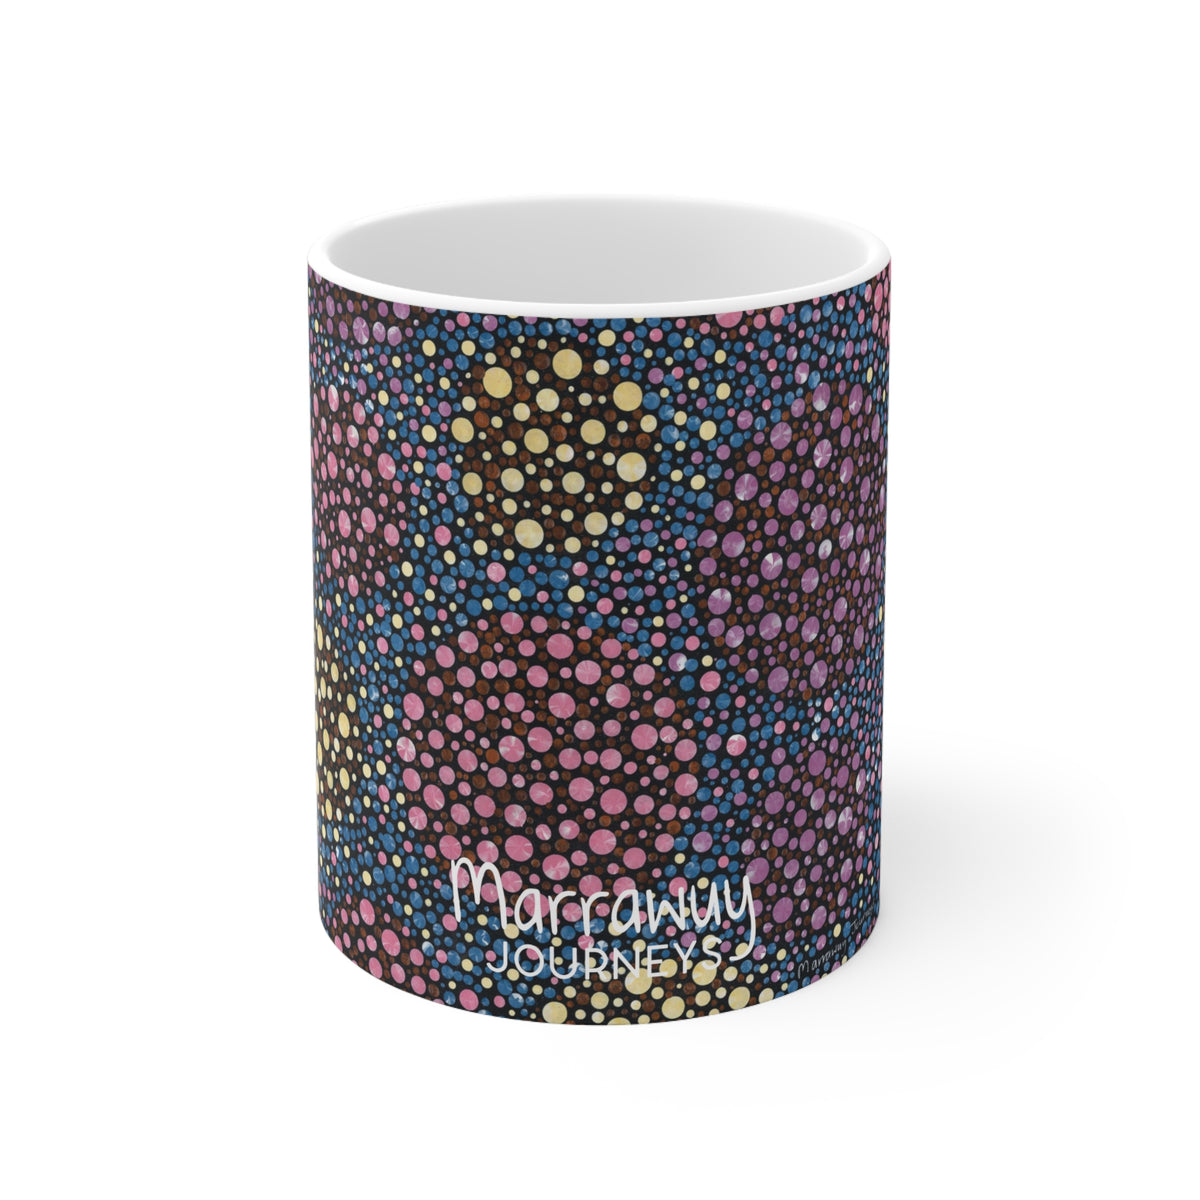 Patience Ceramic Coffee Cups, 11oz - (printed on demand)